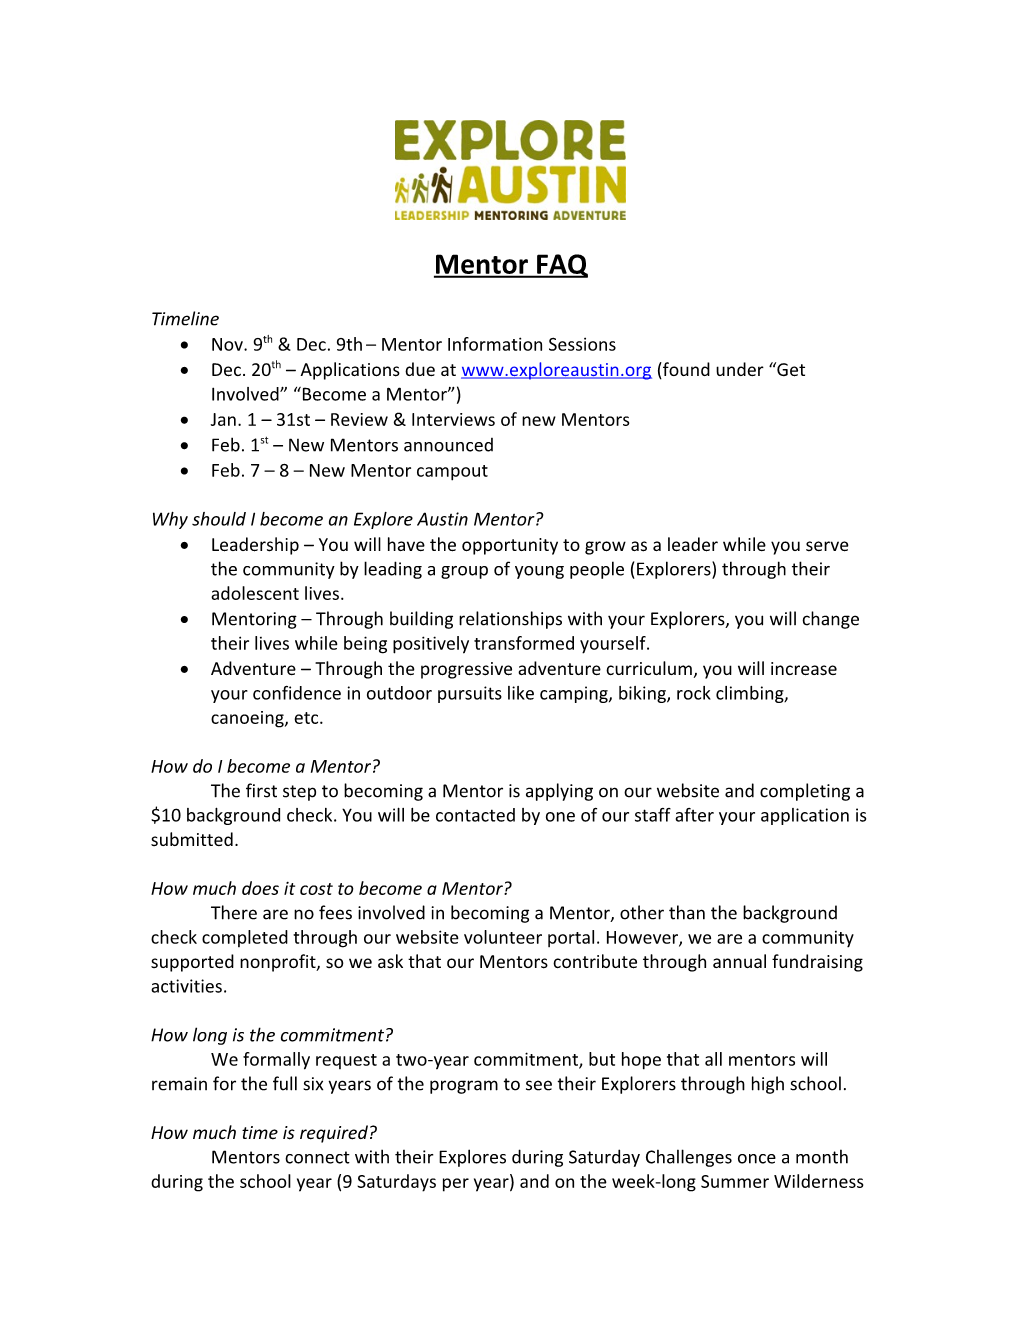 Why Should I Become an Explore Austin Mentor?